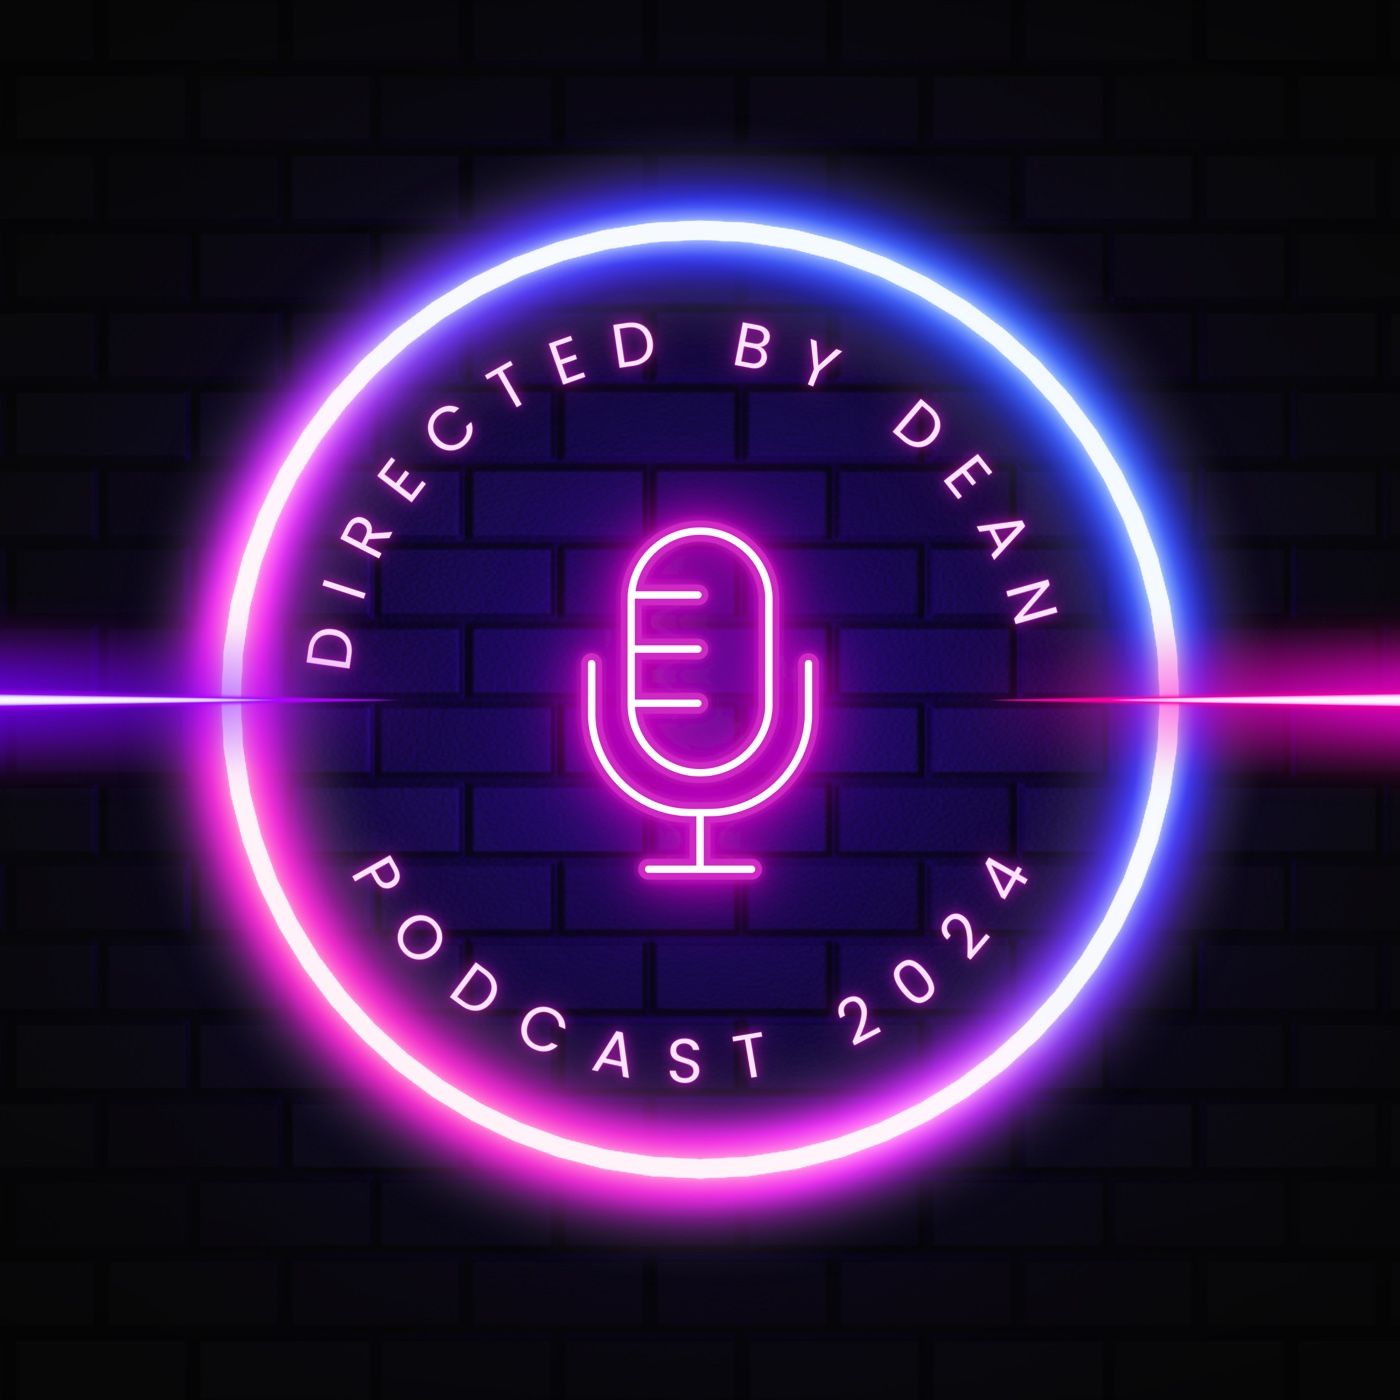 Directed By Dean Podcast Episode